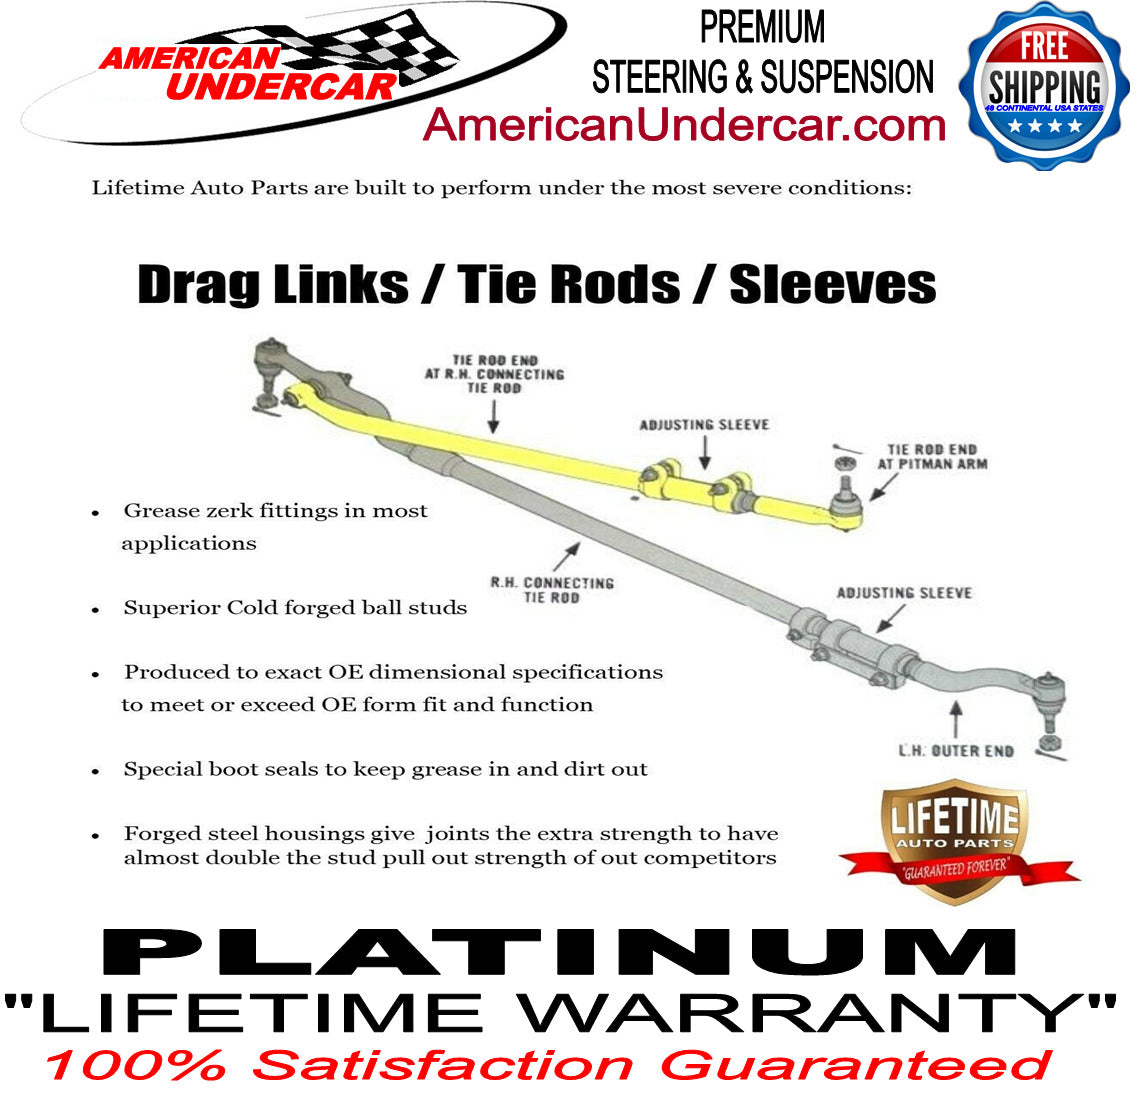 Lifetime Drag Link Tie Rod Ball Joint Kit for 1999-2004 Ford F250, F350 Super Duty, Excursion 4x4